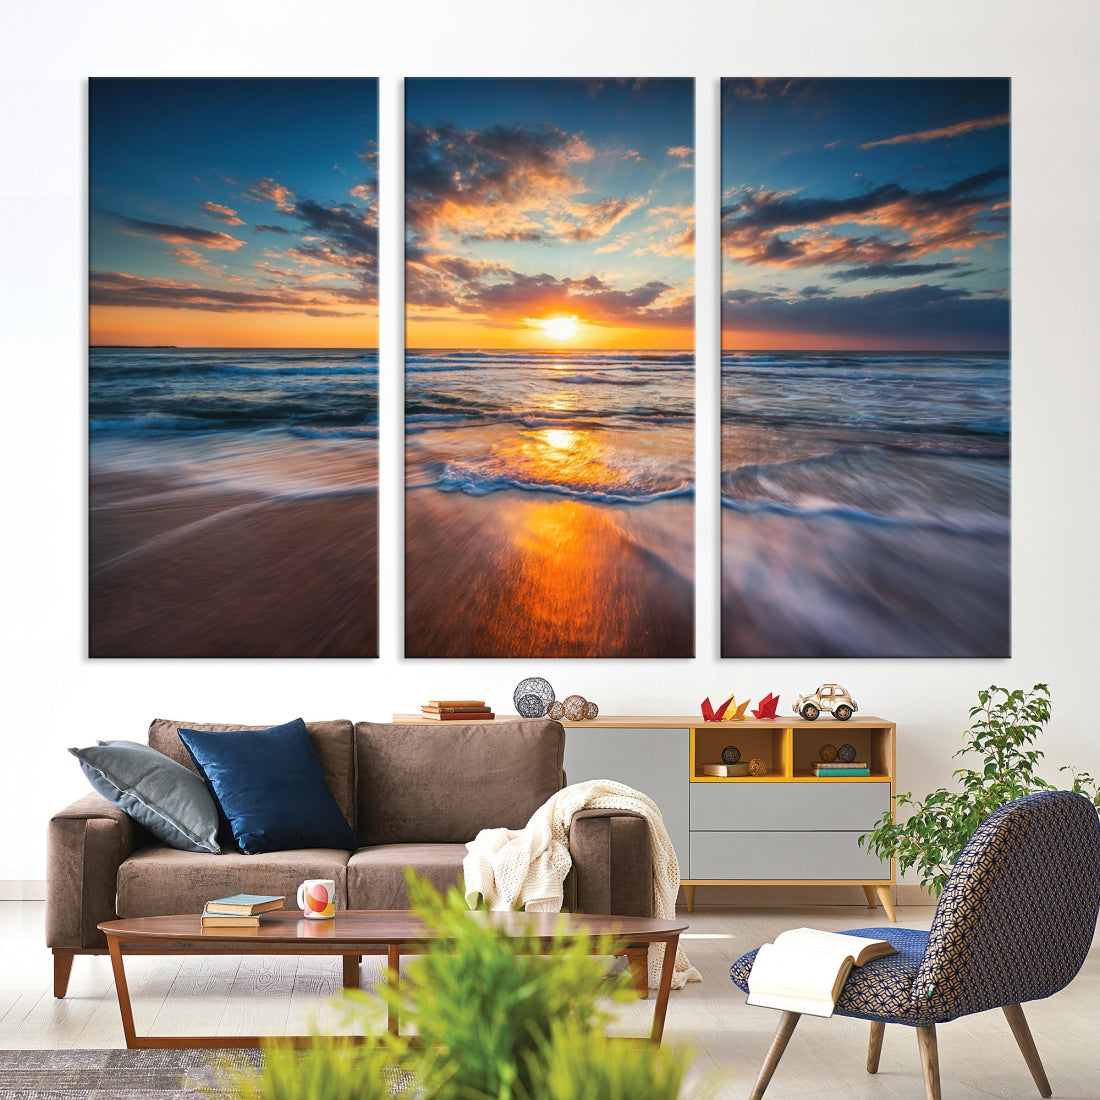 Soothing Sunset on Beach Extra Large Canvas Wall Art Giclee Print for Nursery Decor